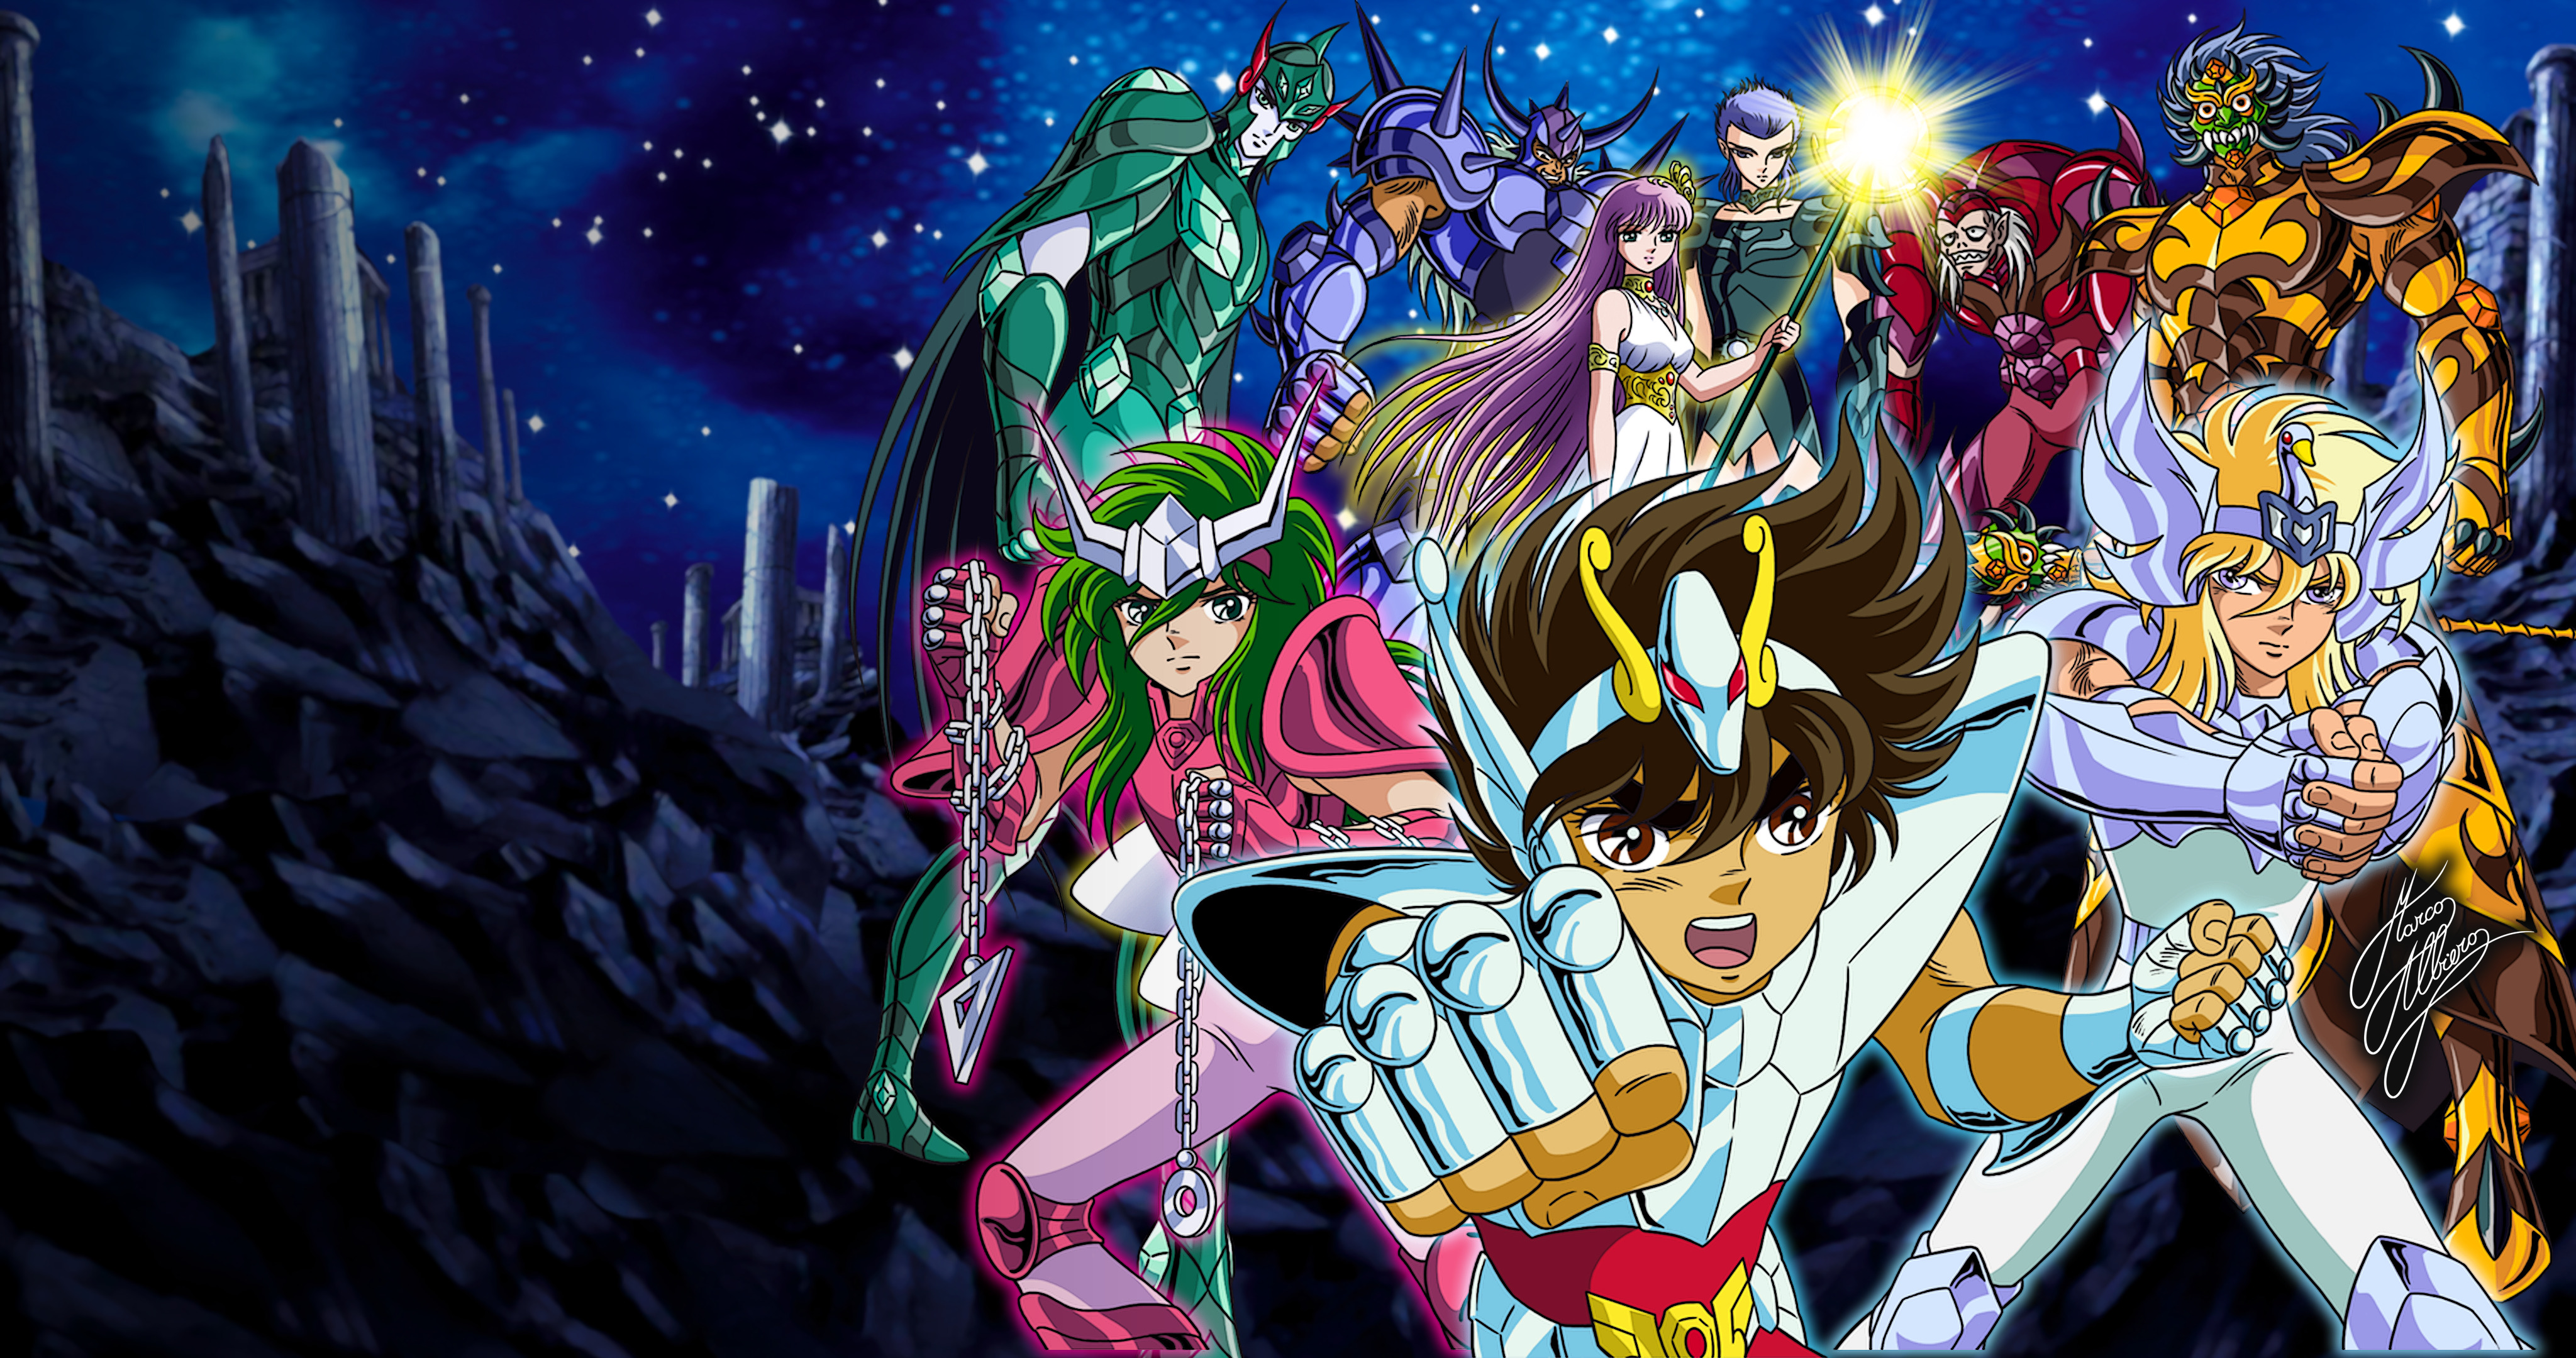 Mobile wallpaper: Anime, Saint Seiya, 1228132 download the picture for free.